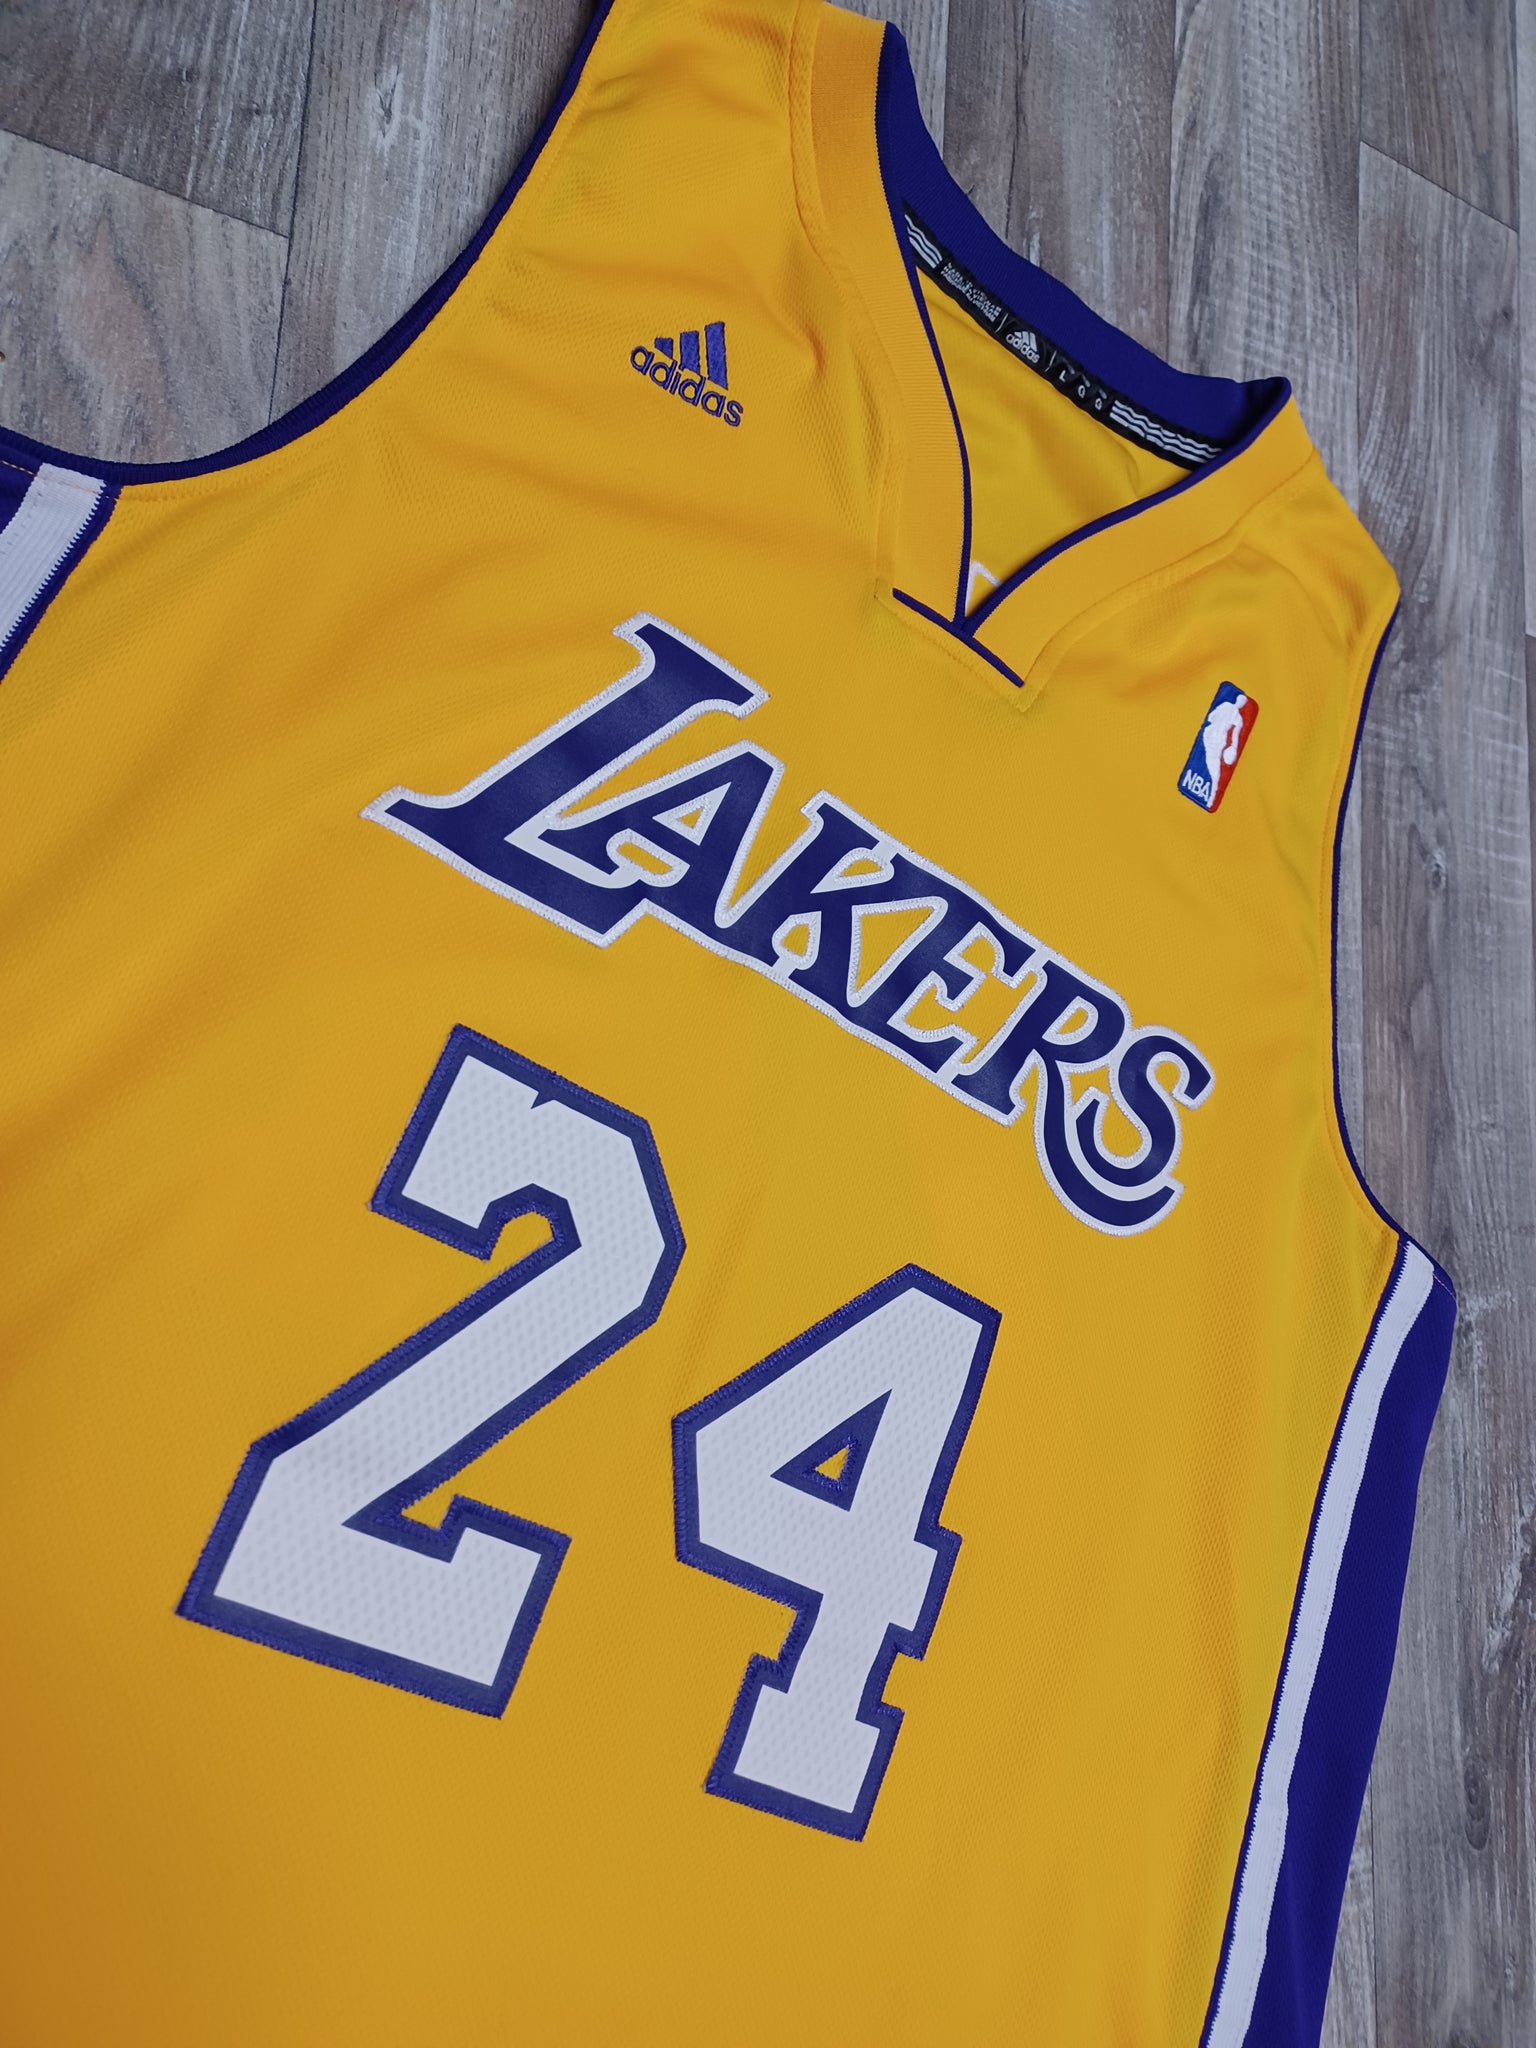 🏀 Kobe Bryant Los Angeles Lakers Jersey Size Large – The